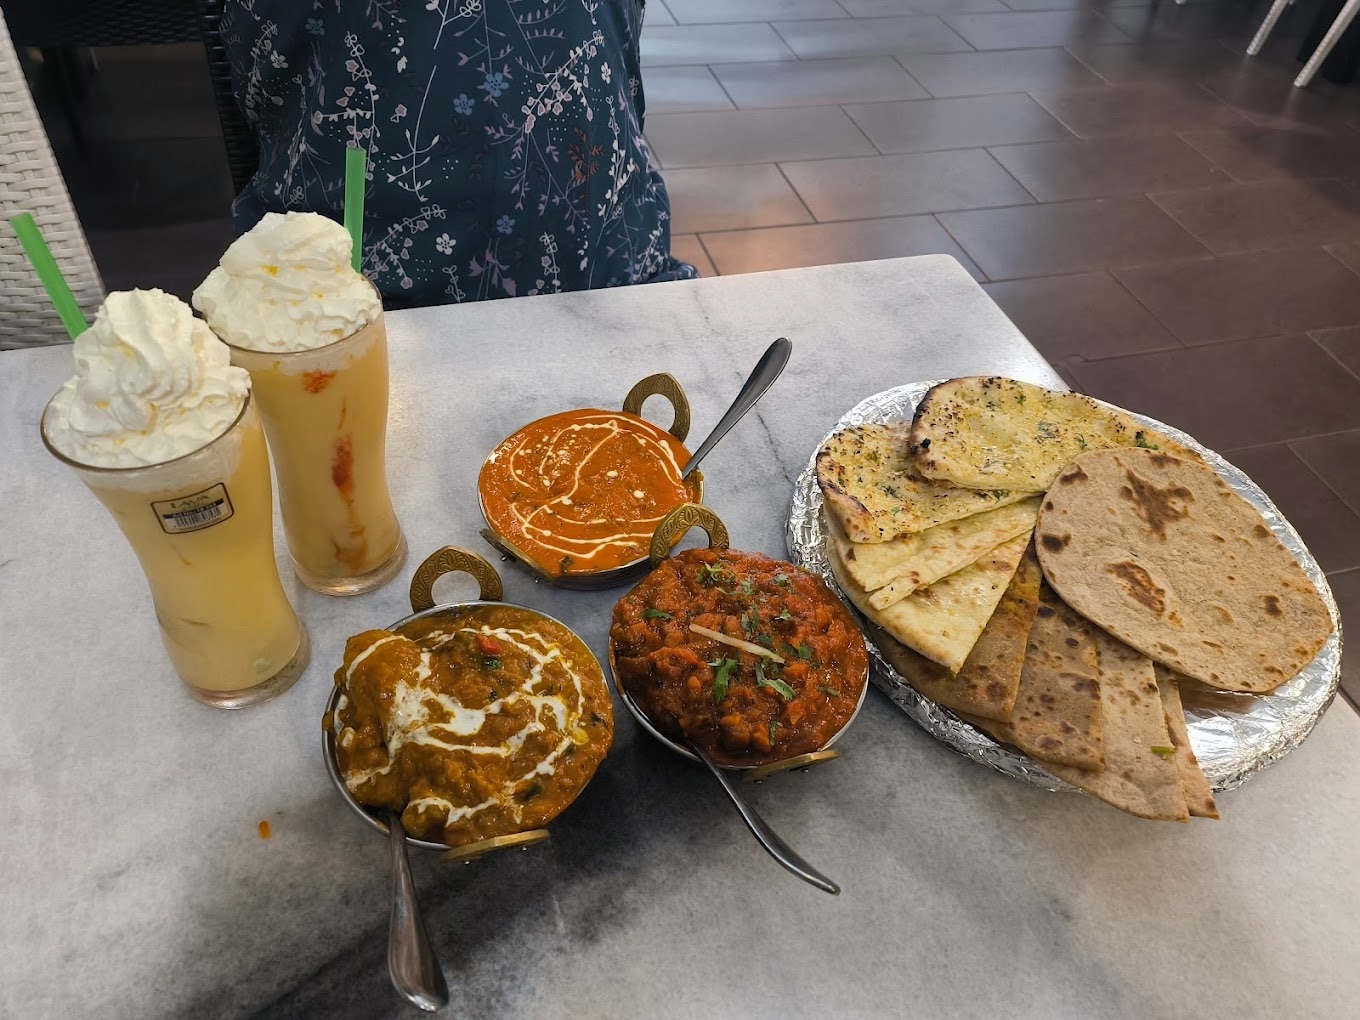 Indian restaurants in KL & PJ - mango lassi, curry dishes, and flatbread